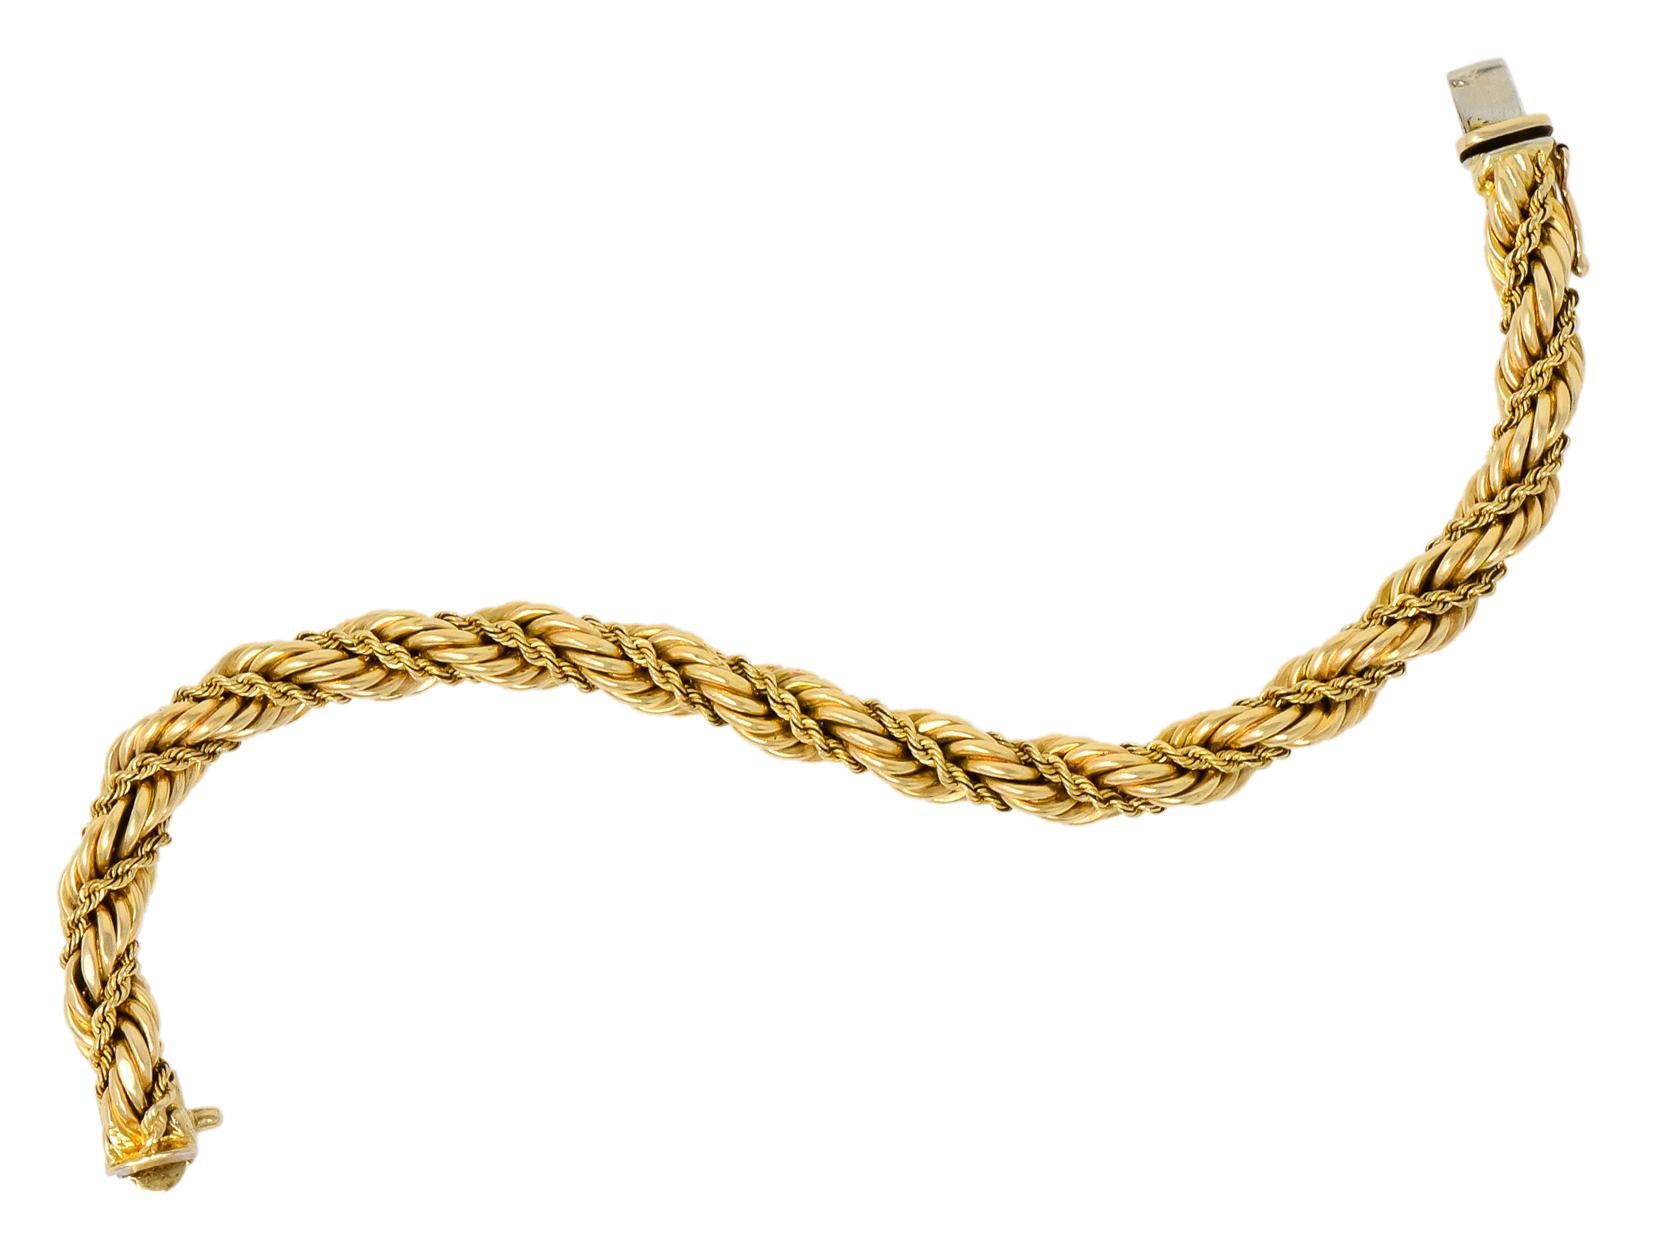 Designed as a polished twisted rope chain encircled with a smaller faceted twisted rope chain

Completed by concealed clasp with figure eight safety

Circa 1970's

Partially signed Tiffany & Co. and stamped 585 for 14 karat gold

Length: 7 1/2